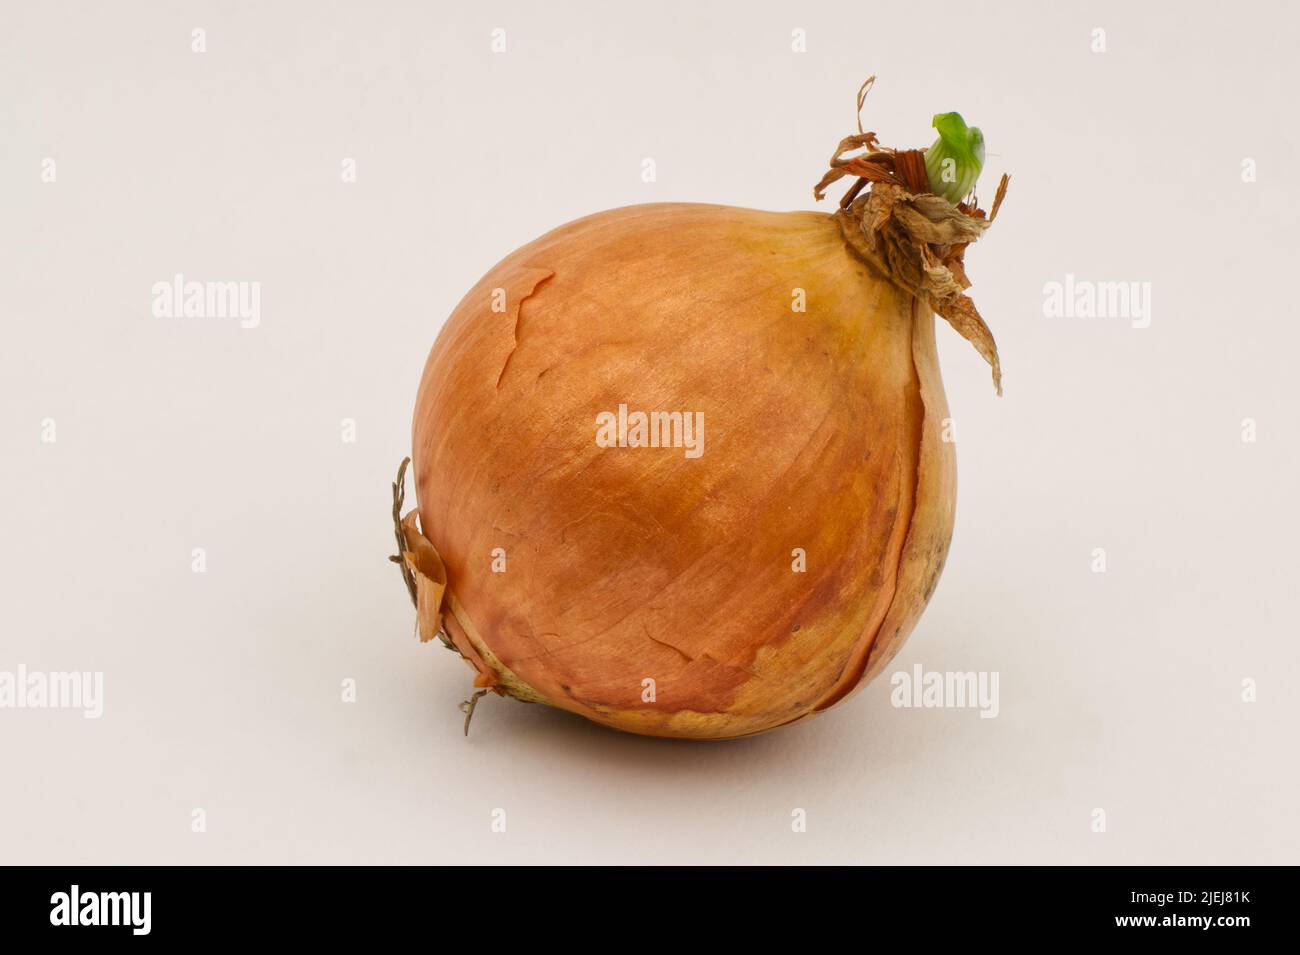 Onion bulb starting to sprout with new growth. Alliam cepa liliaceae Stock Photo